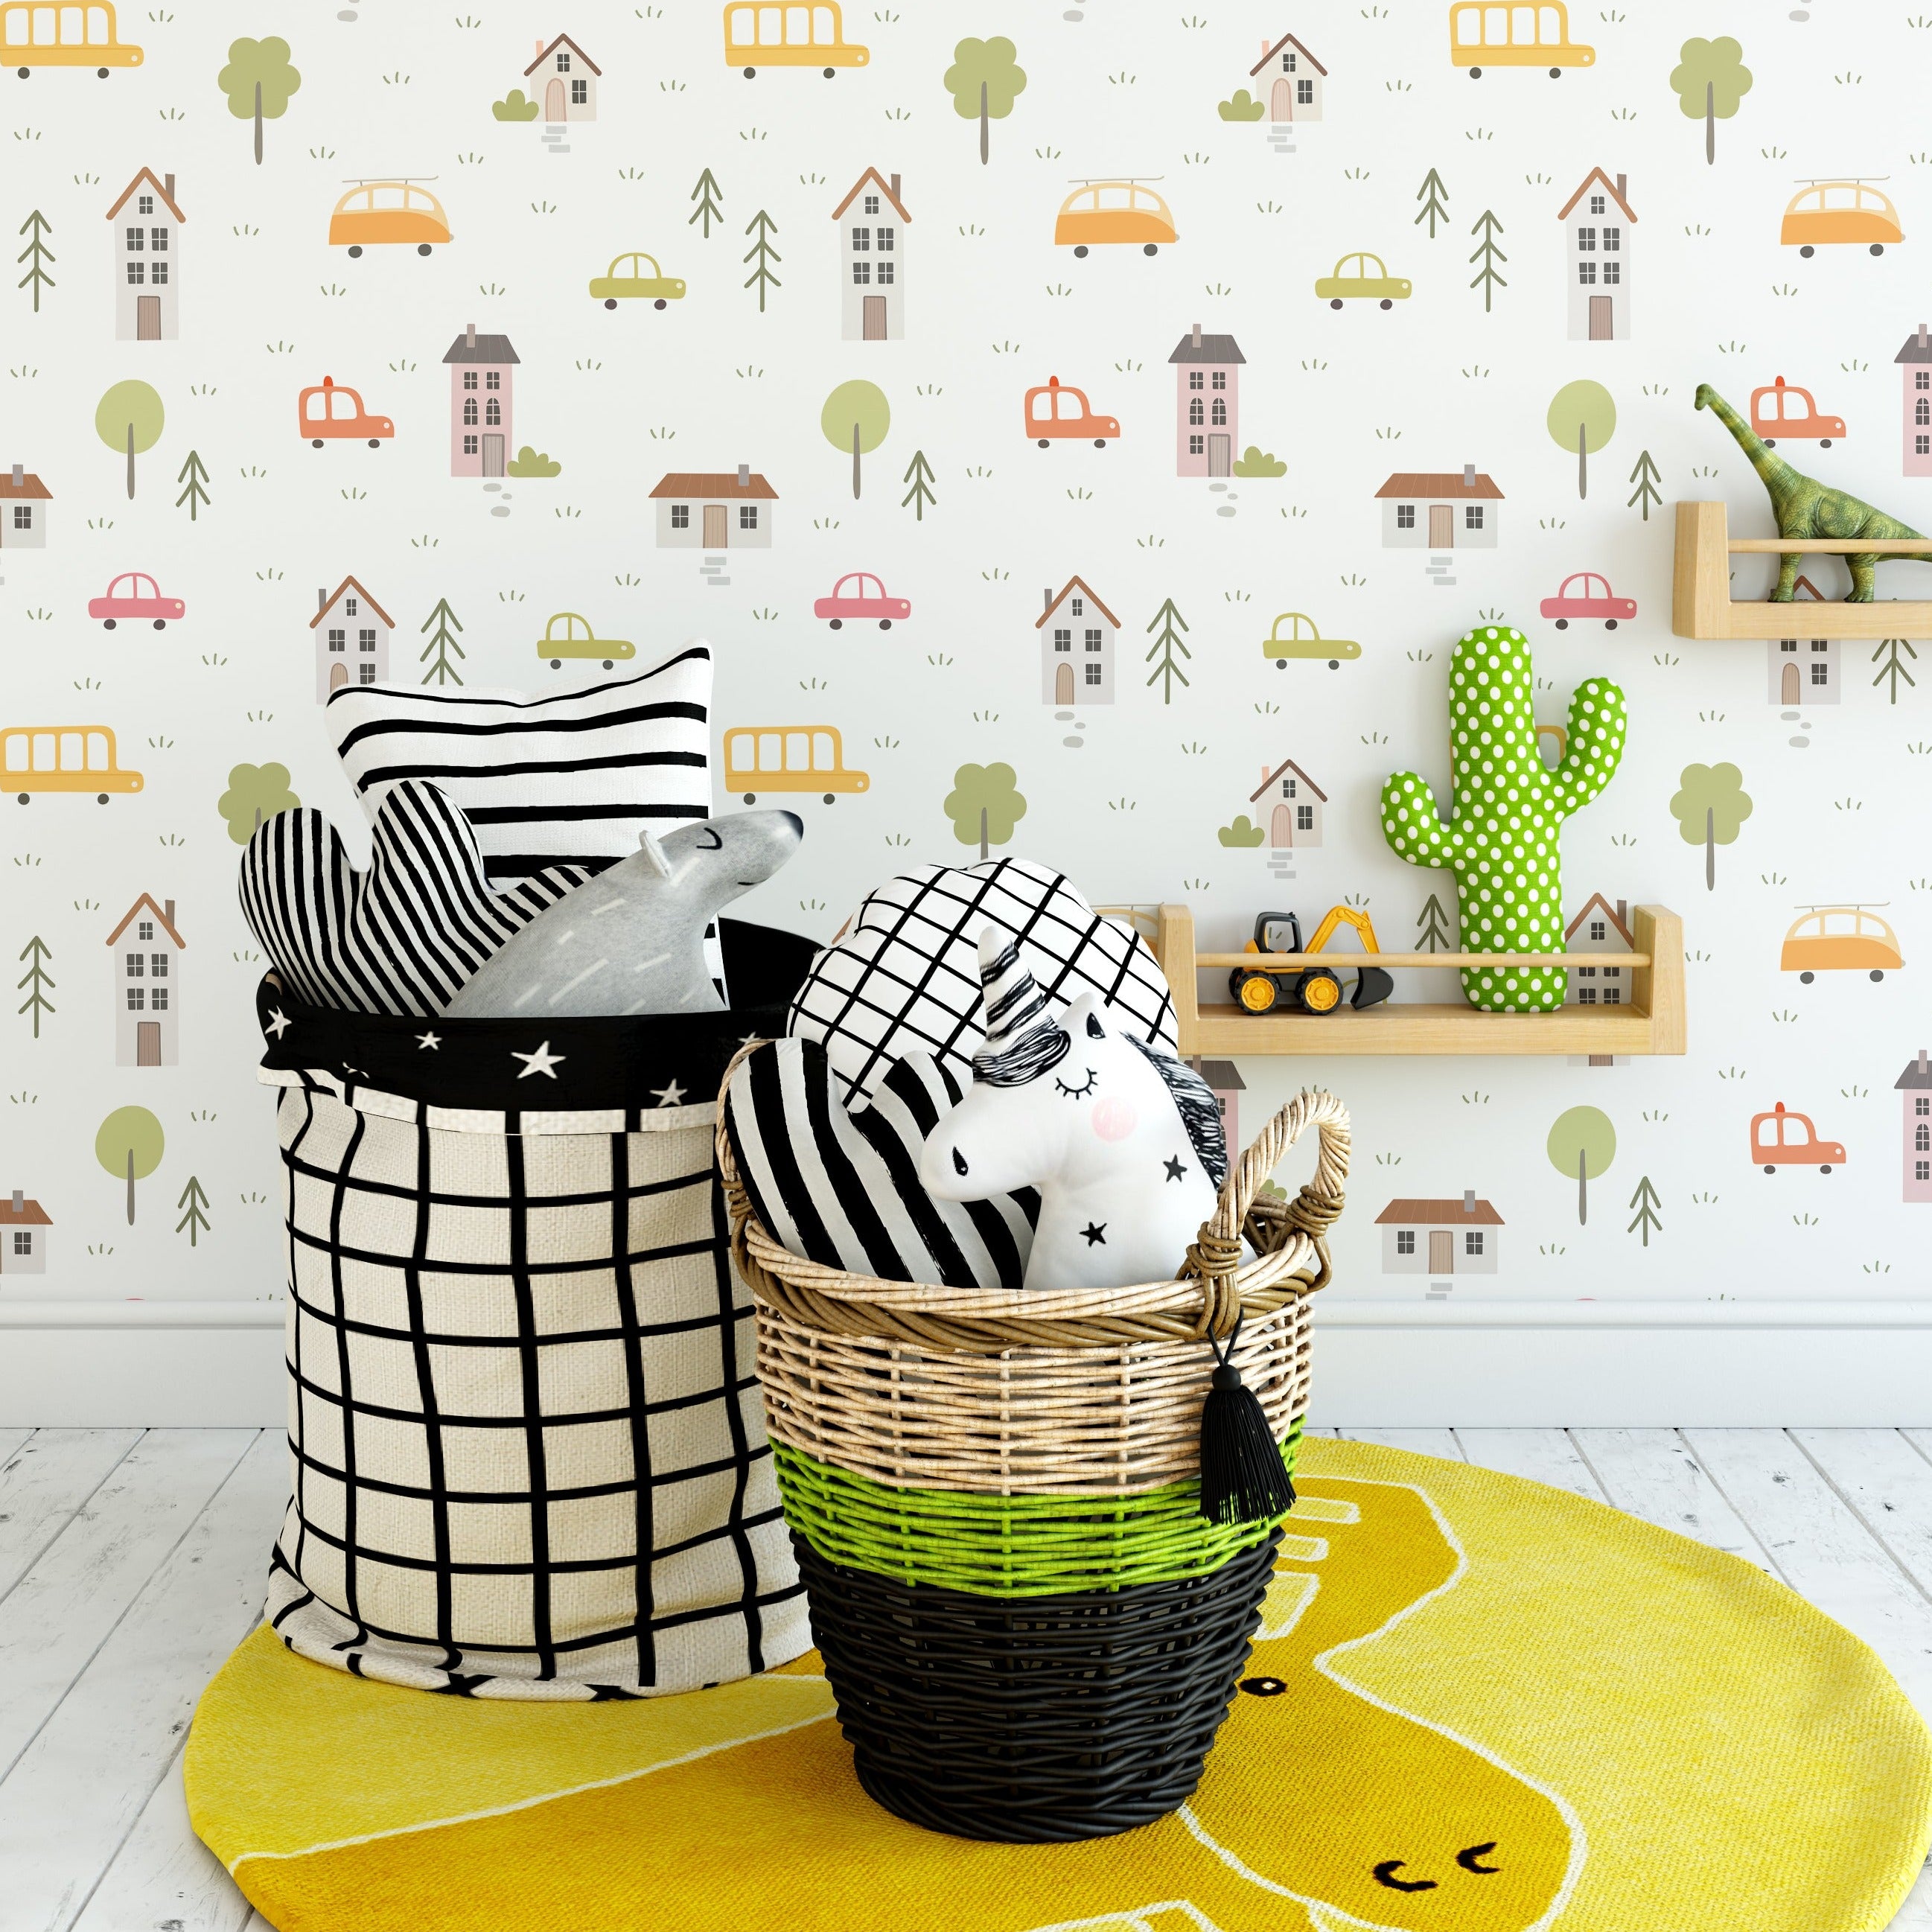 Children's playroom with School Bus Wallpaper, displaying a fun and lively pattern of colorful cars, buses, houses, and trees, complemented by decorative pillows and toys.